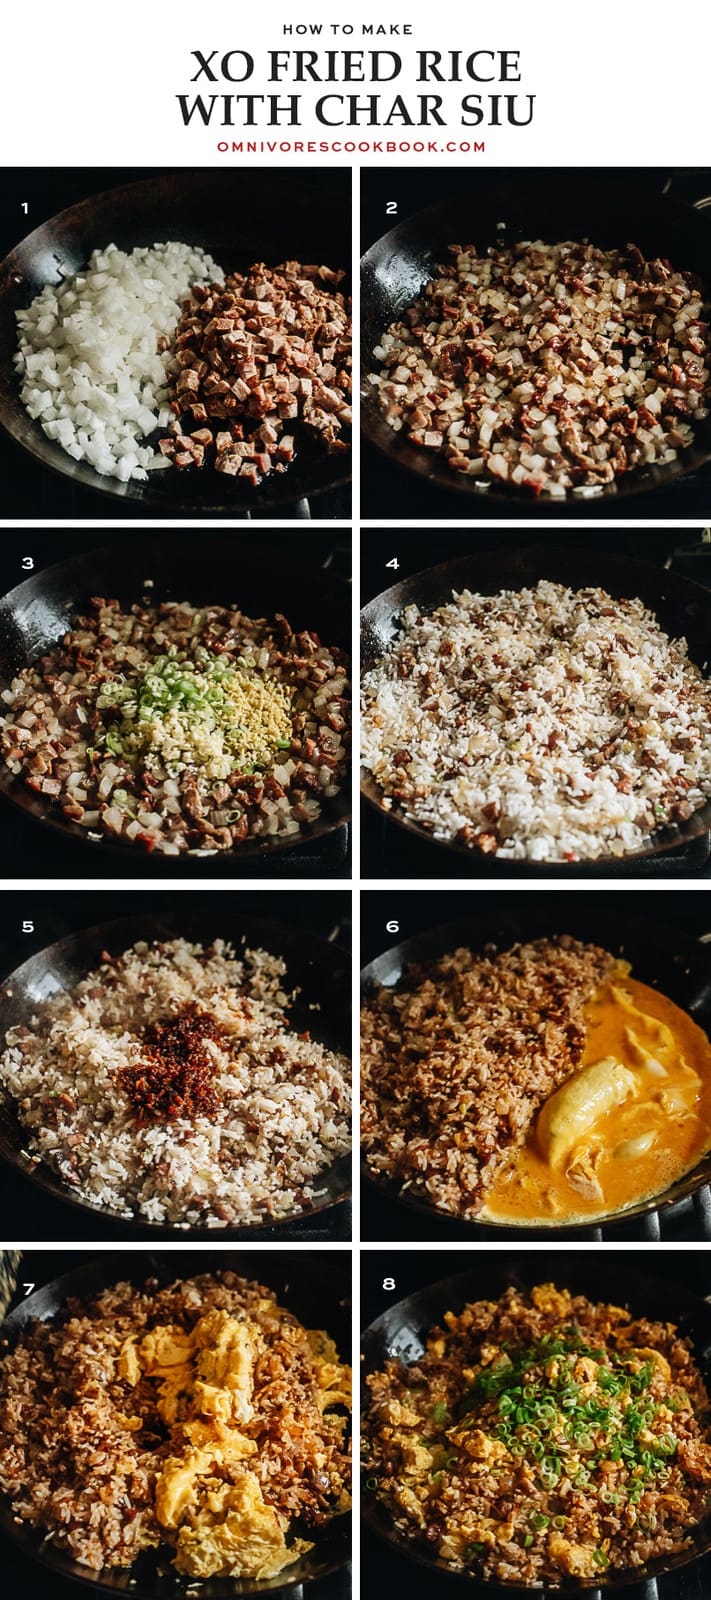 XO fried rice cooking step-by-step